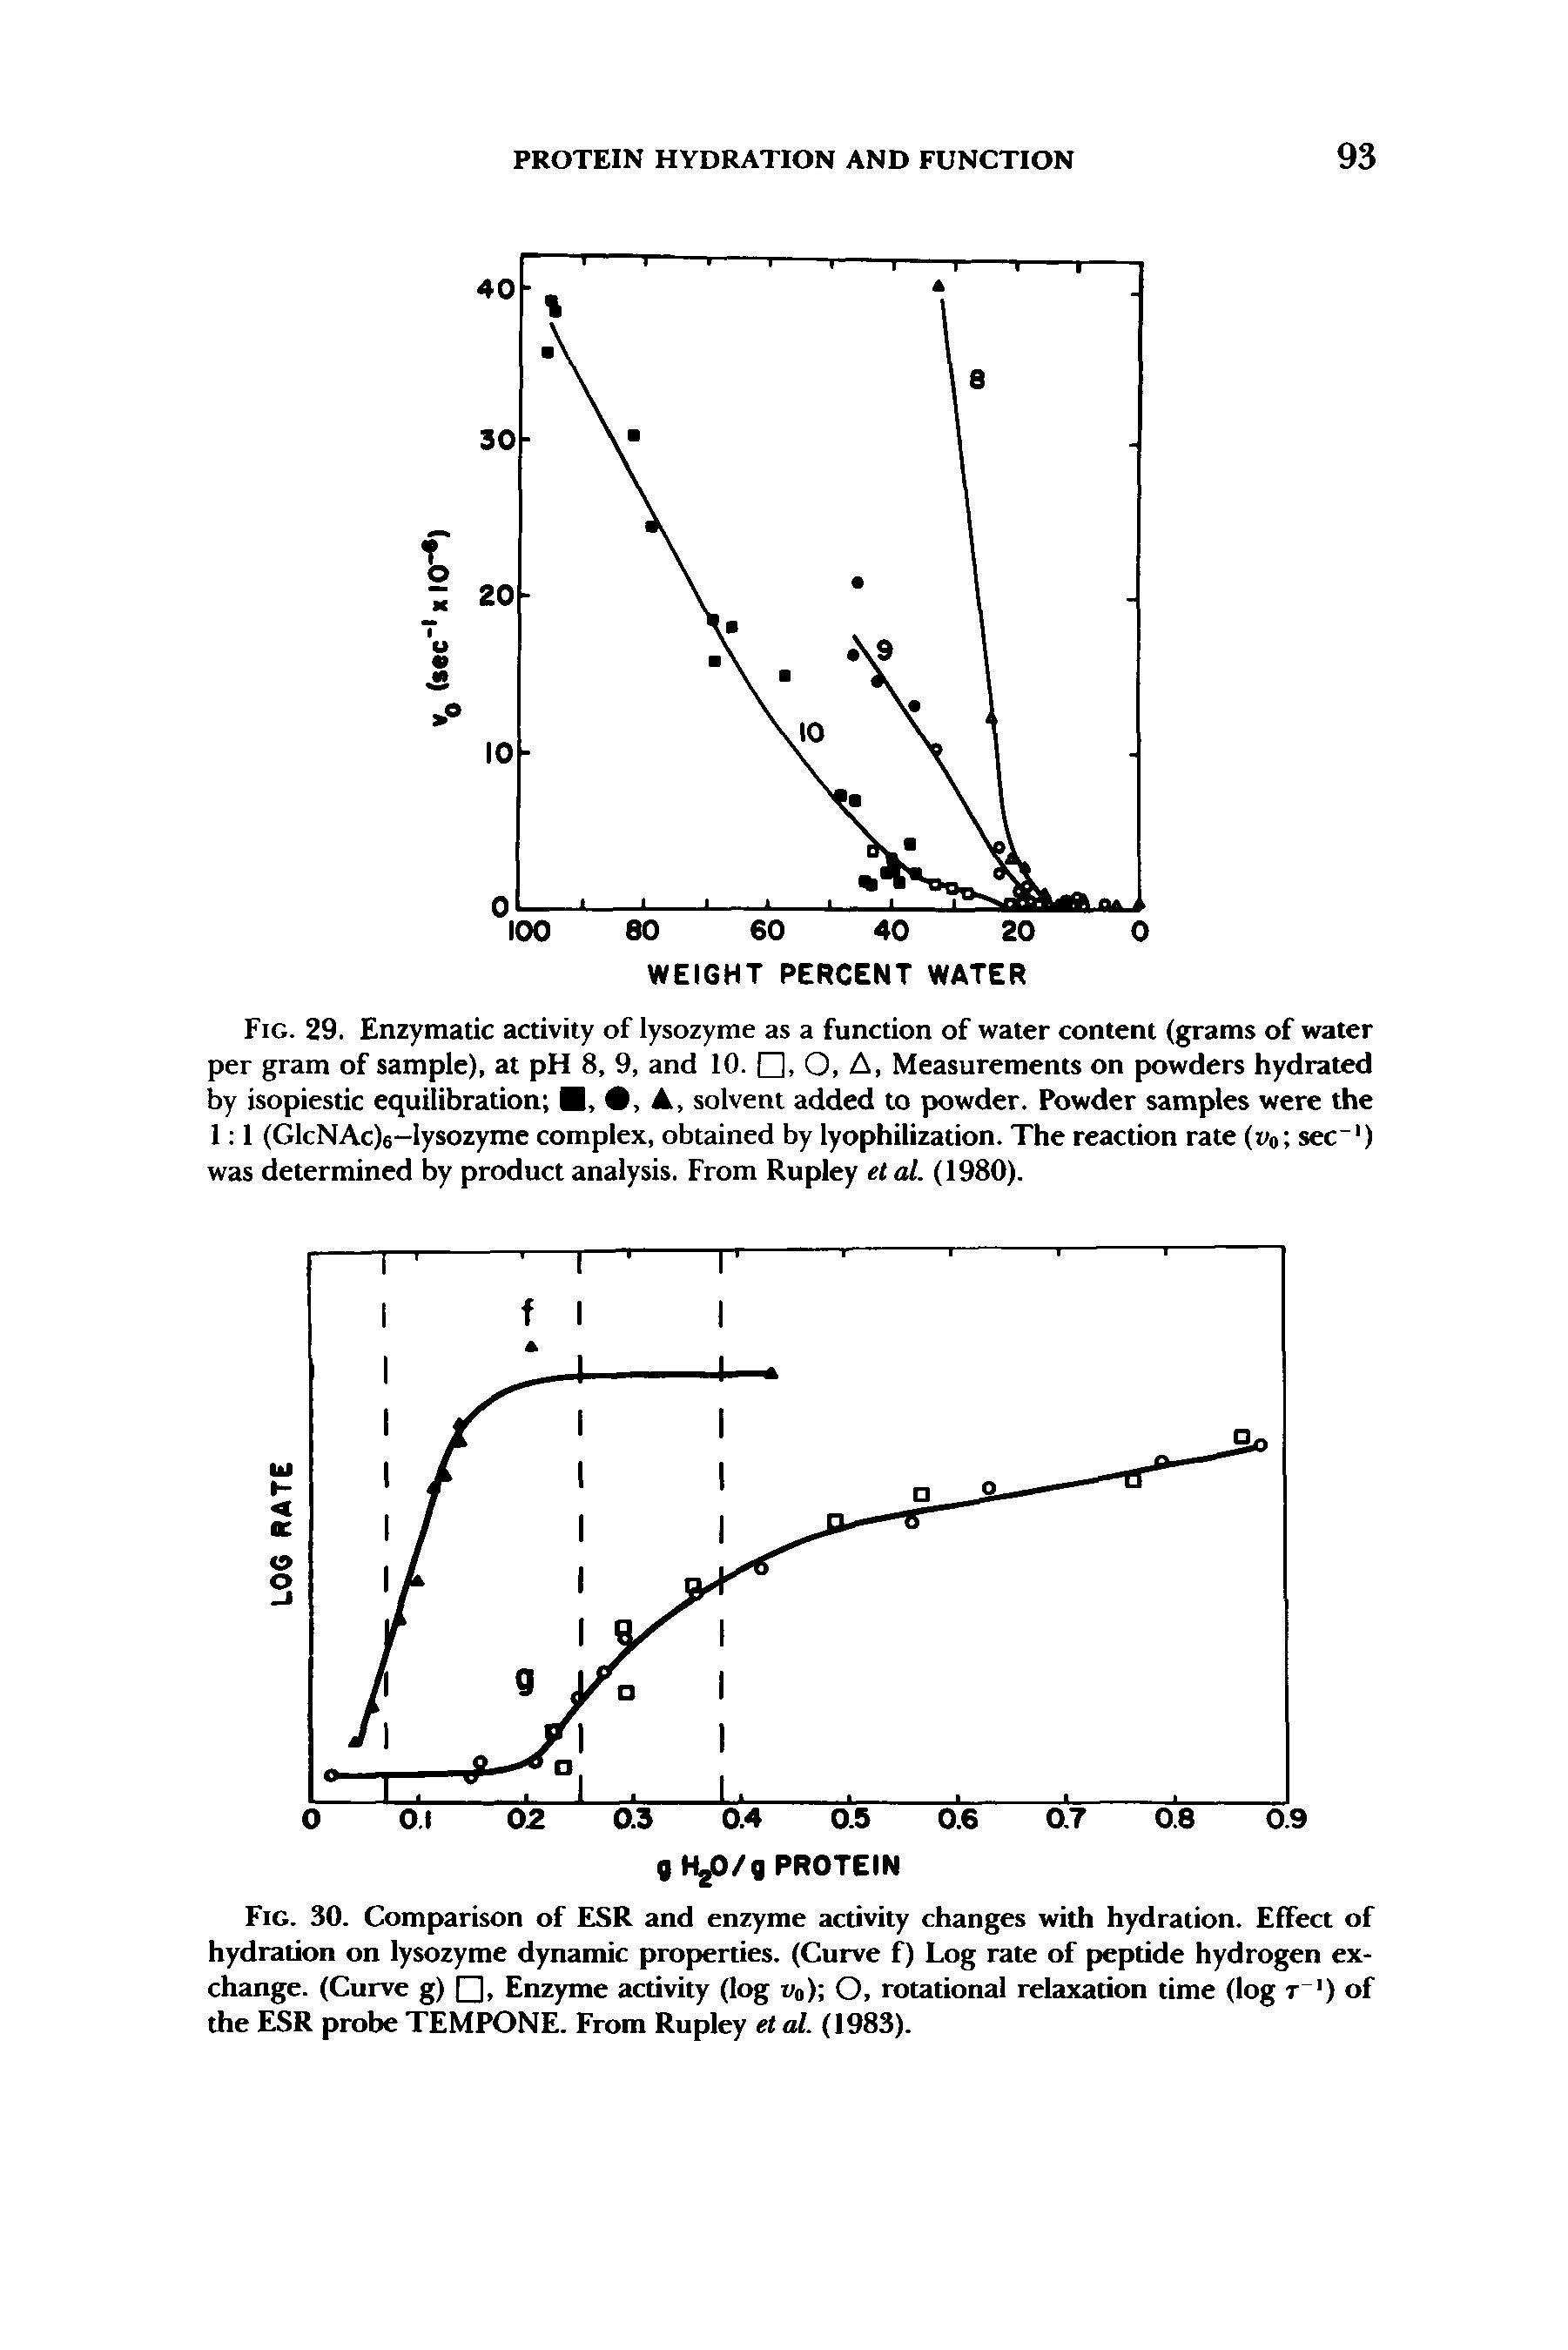 Fig. 29. Enzymatic activity of lysozyme as a function of water content (grams of water per gram of sample), at pH 8, 9, and 10. , O, A, Measurements on powders hydrated by isopiestic equilibration ,, A, solvent added to powder. Powder samples were the 1 1 (GlcNAc)6-lysozyme complex, obtained by lyophilization. The reaction rate (no sec ) was determined by product analysis. From Rupley etcd. (1980).